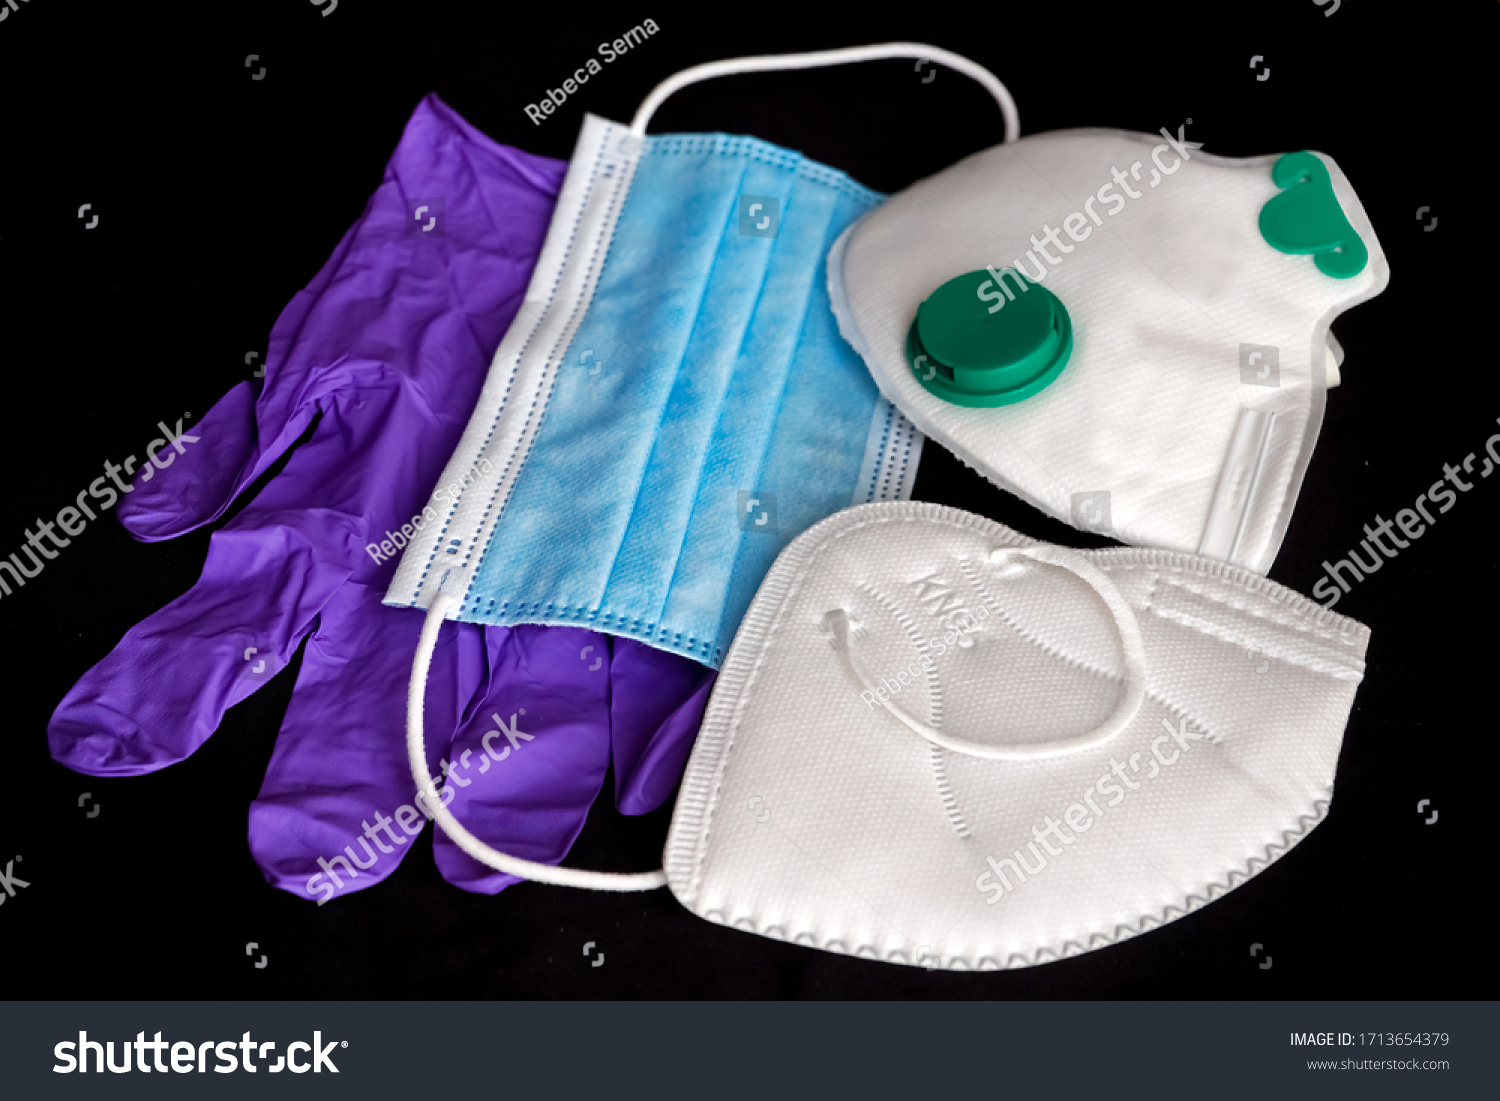 Surgical mask, medical masks FFP2 / FFP3 / N95 / KN95 and gloves for protection against diseases, virus, flu, coronavirus COVID-19. Personal protective equipment PPE. Different types of face mask.  #1713654379